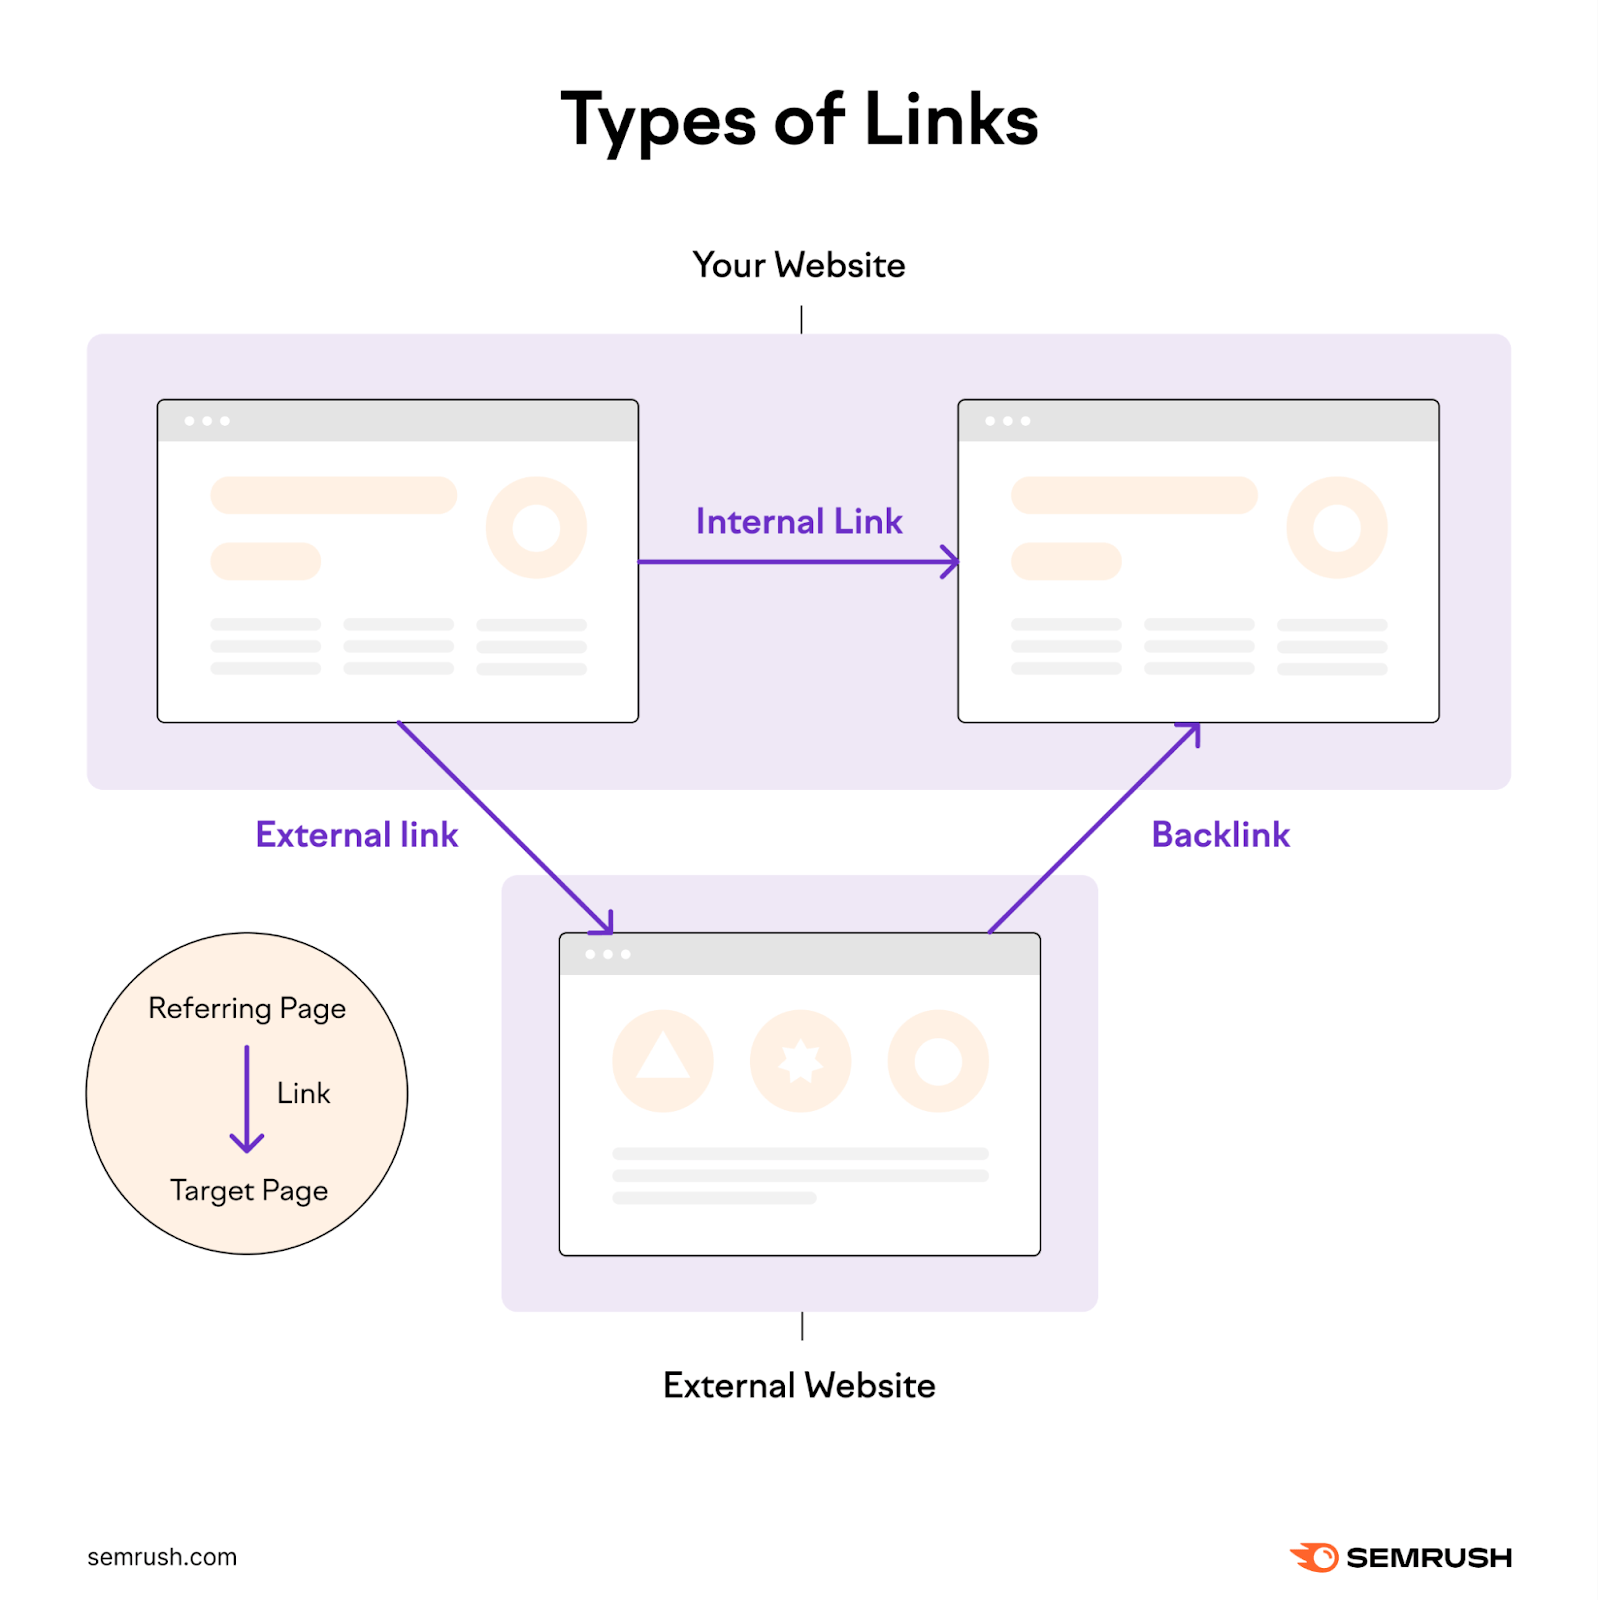 A ocular  showing antithetic  types of links, including an interior   link, outer  nexus  and a backlink